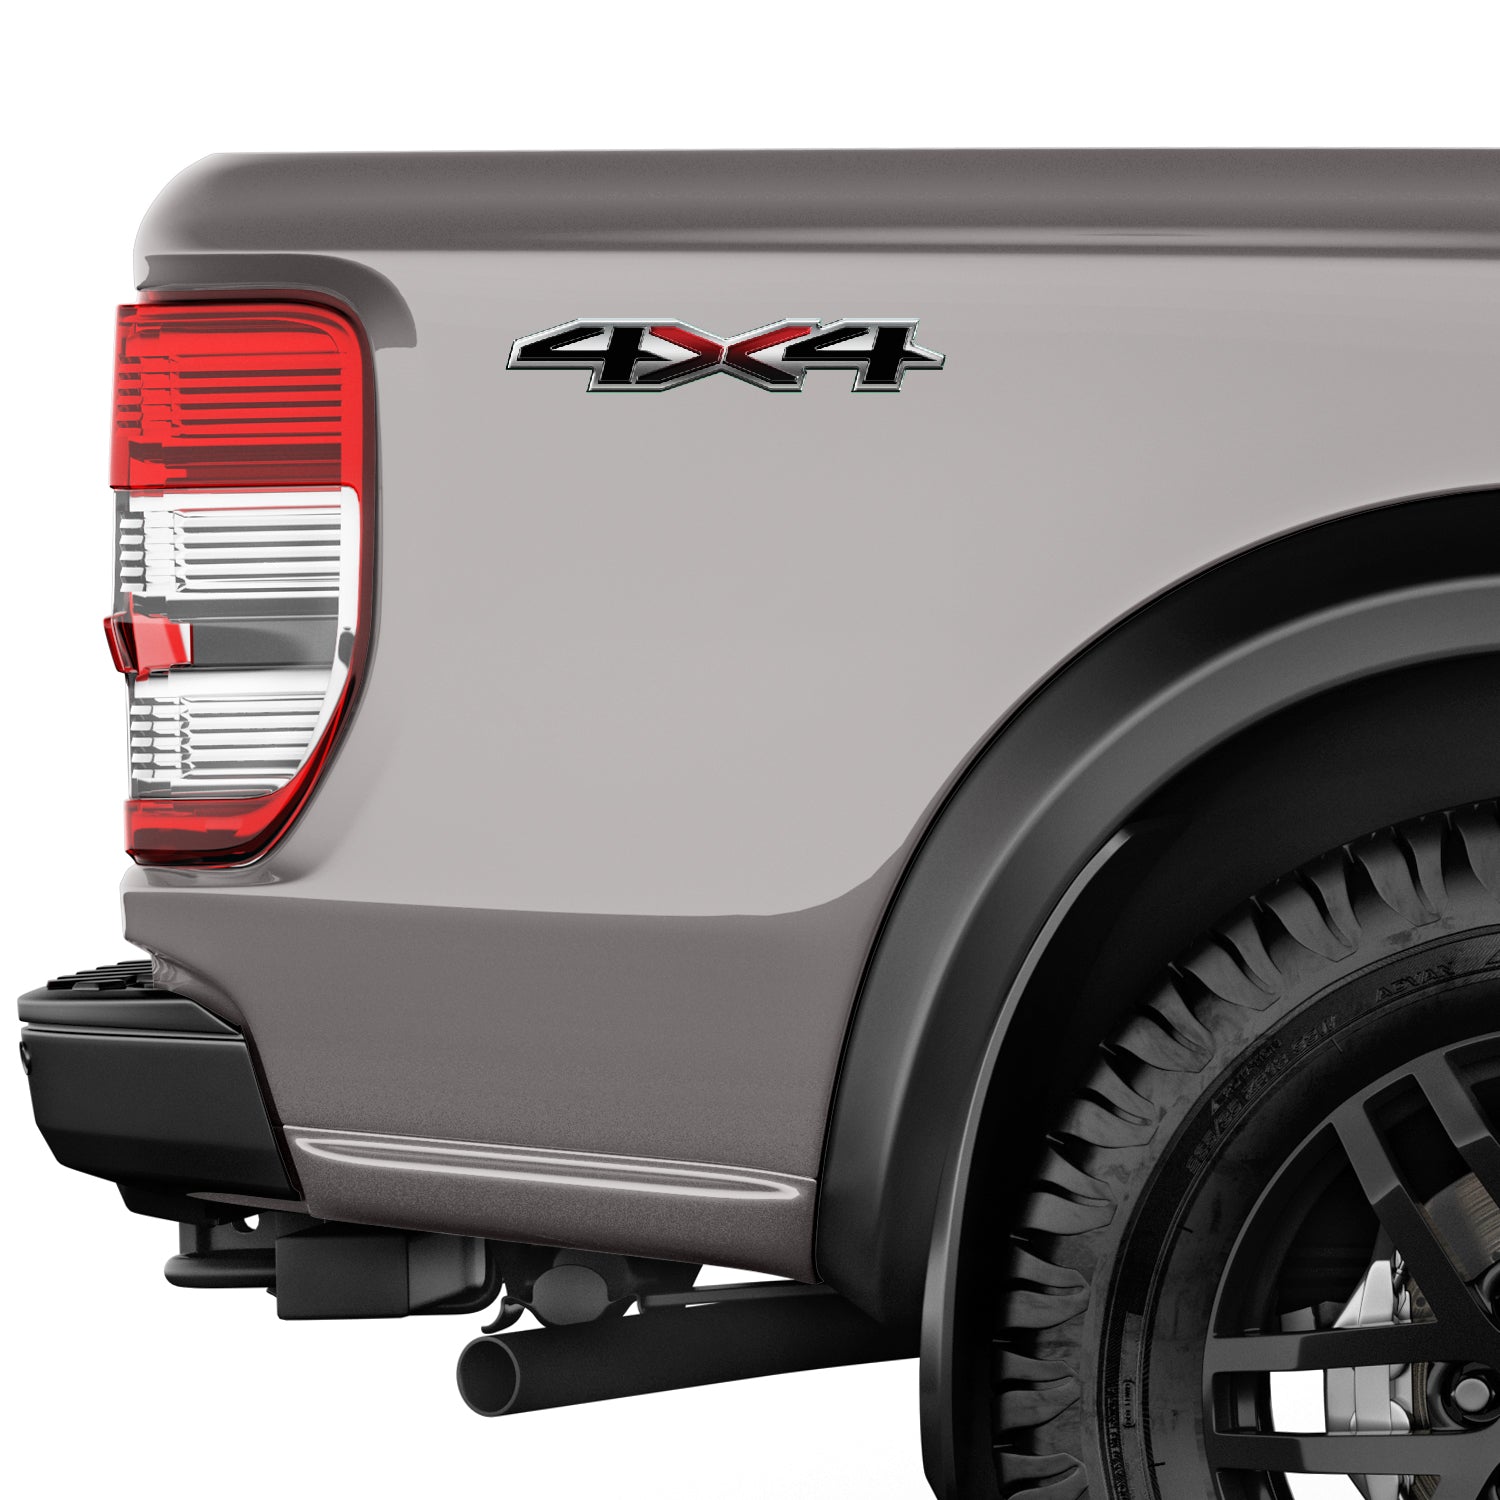 4x4 Off Road Metal Decal Replacement Sticker | Bedside Off Road Sticker for 4x4 Truck GMC Sierra Chevy Silverado Suburban 2019 2020 - TiresFX